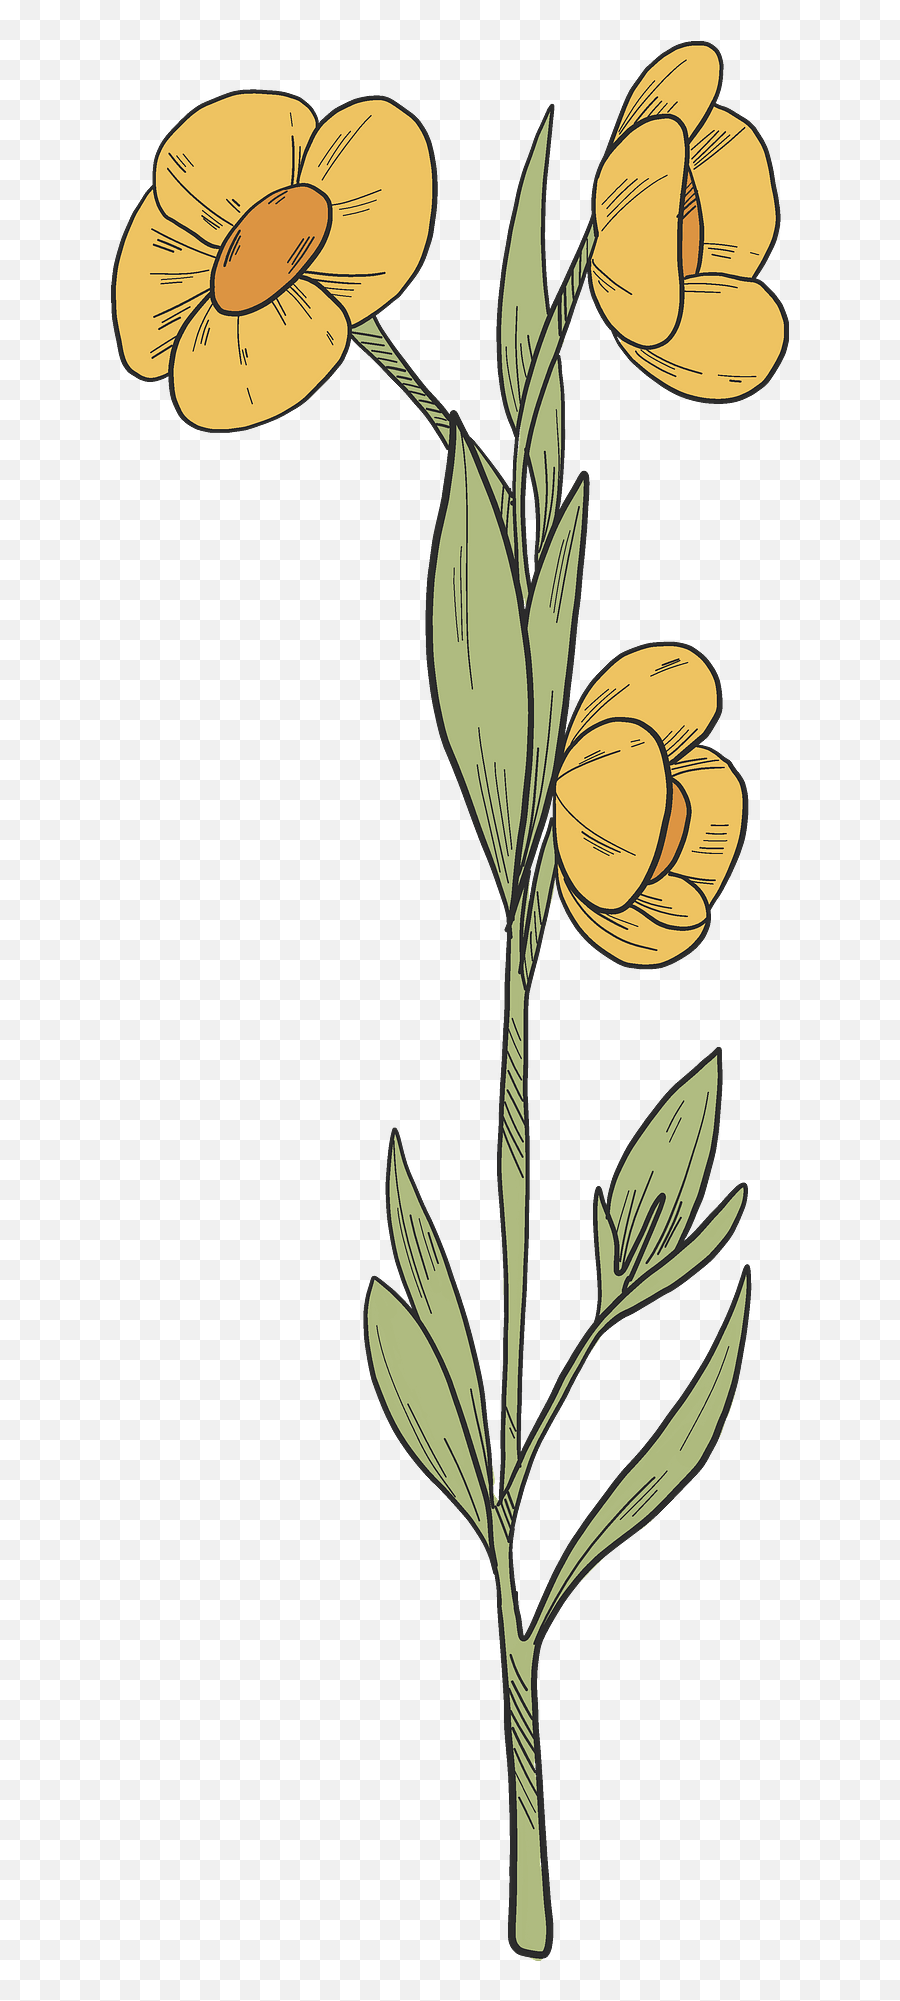 Wildflowers Clipart Free Download Transparent Png Creazilla - Fresh,Wildflowers Png